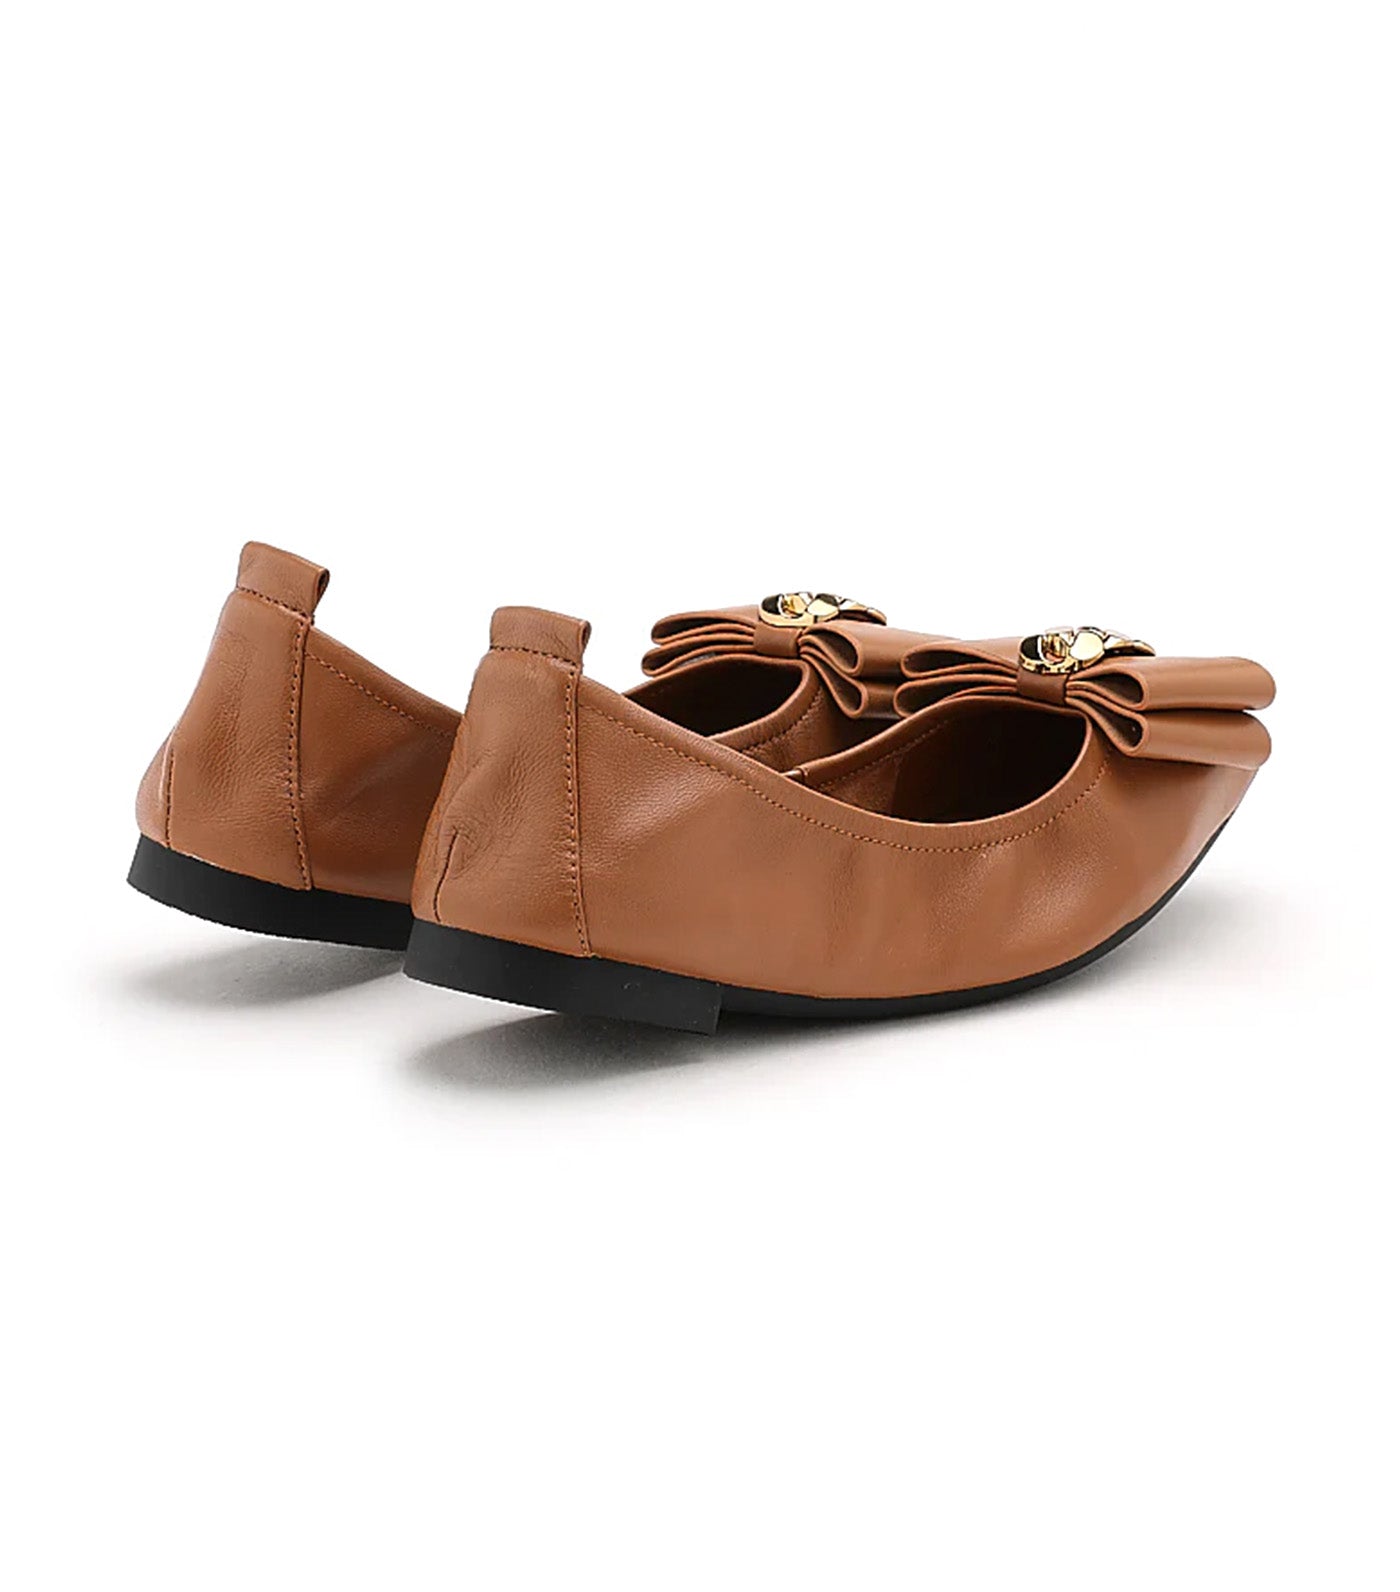 Candace Pop Of Bow Square Toe Foldable Flats Camel